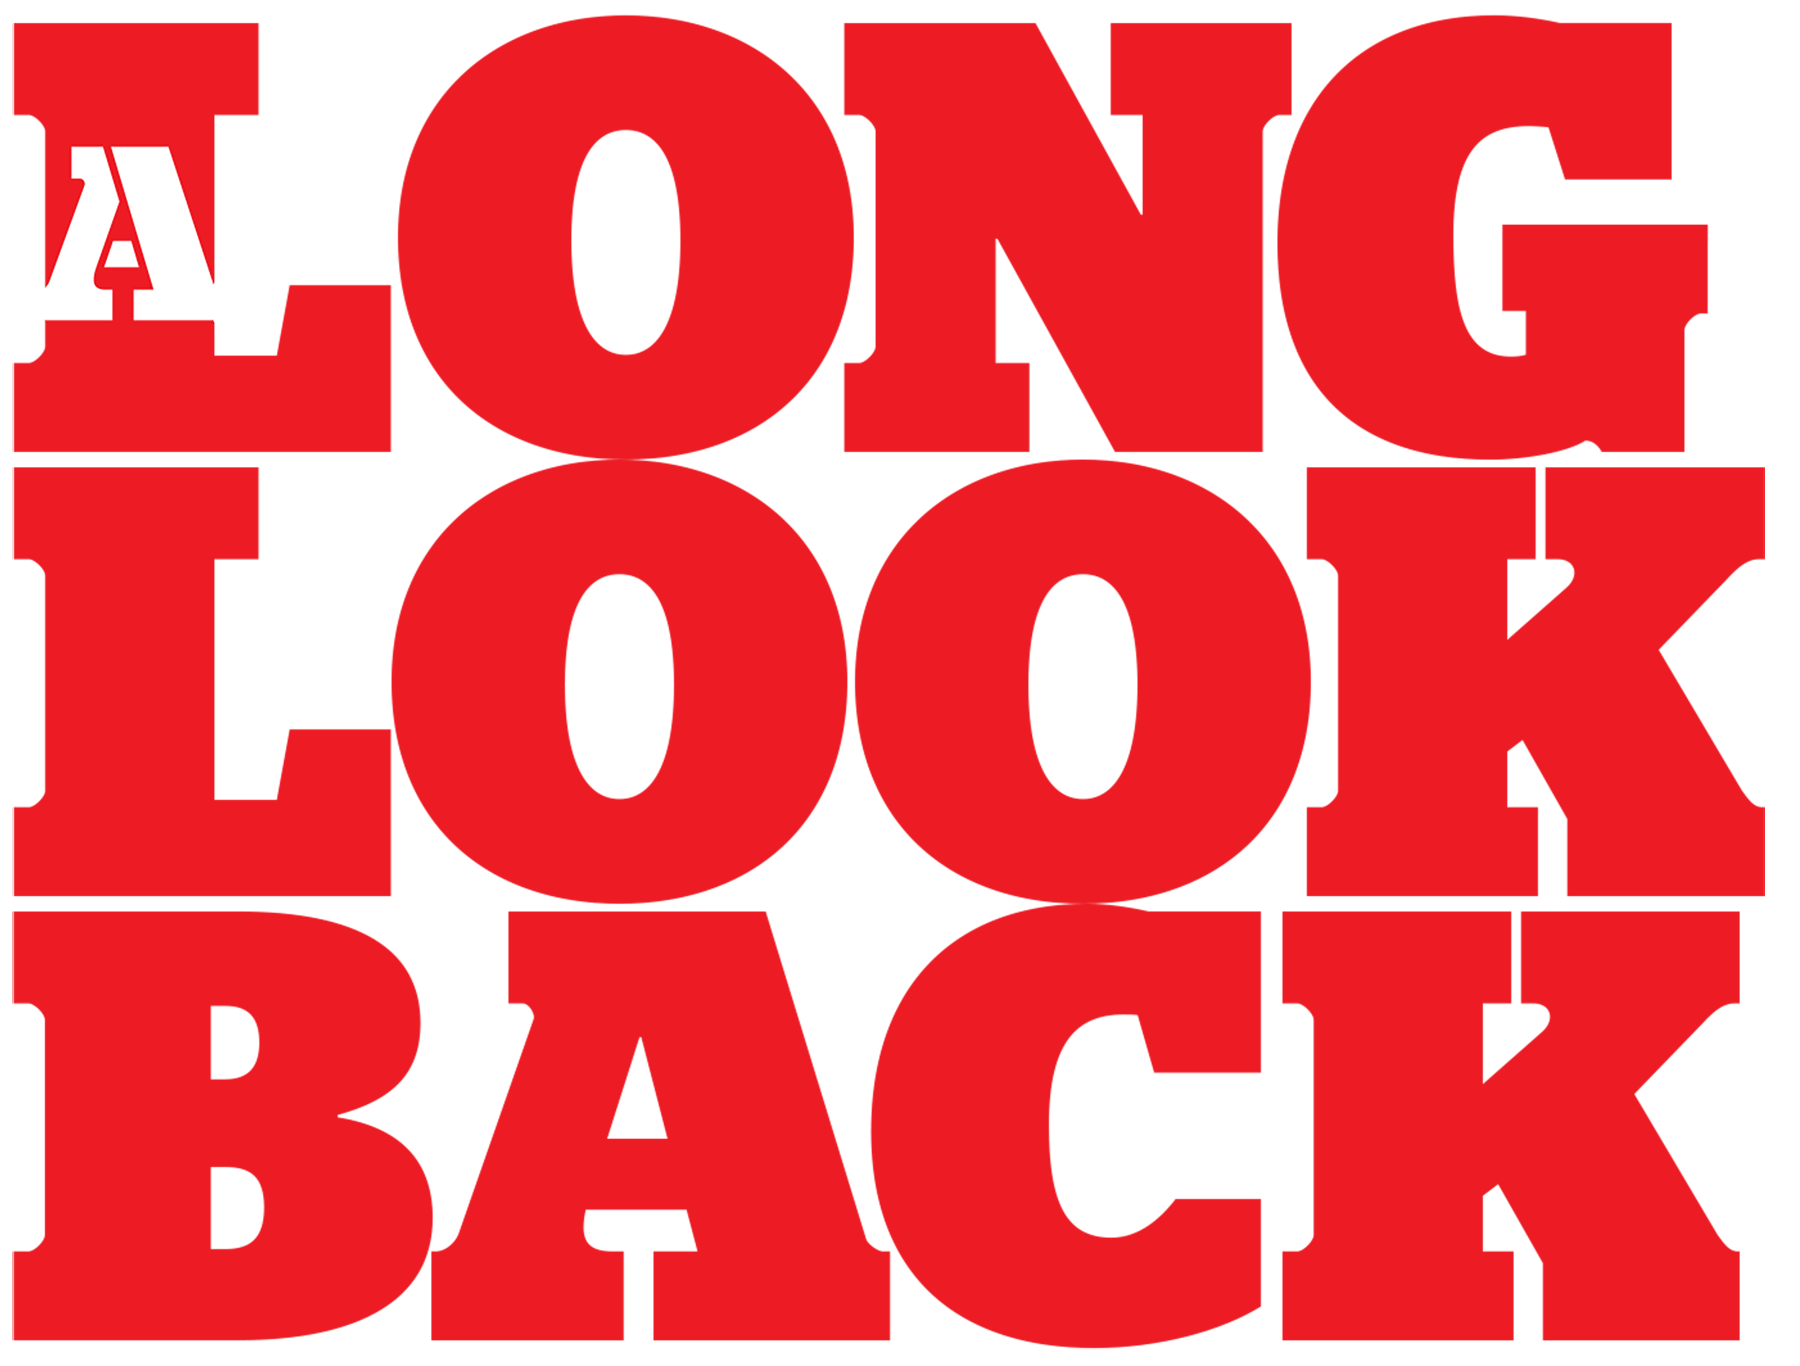 A Long Look Back typographic title